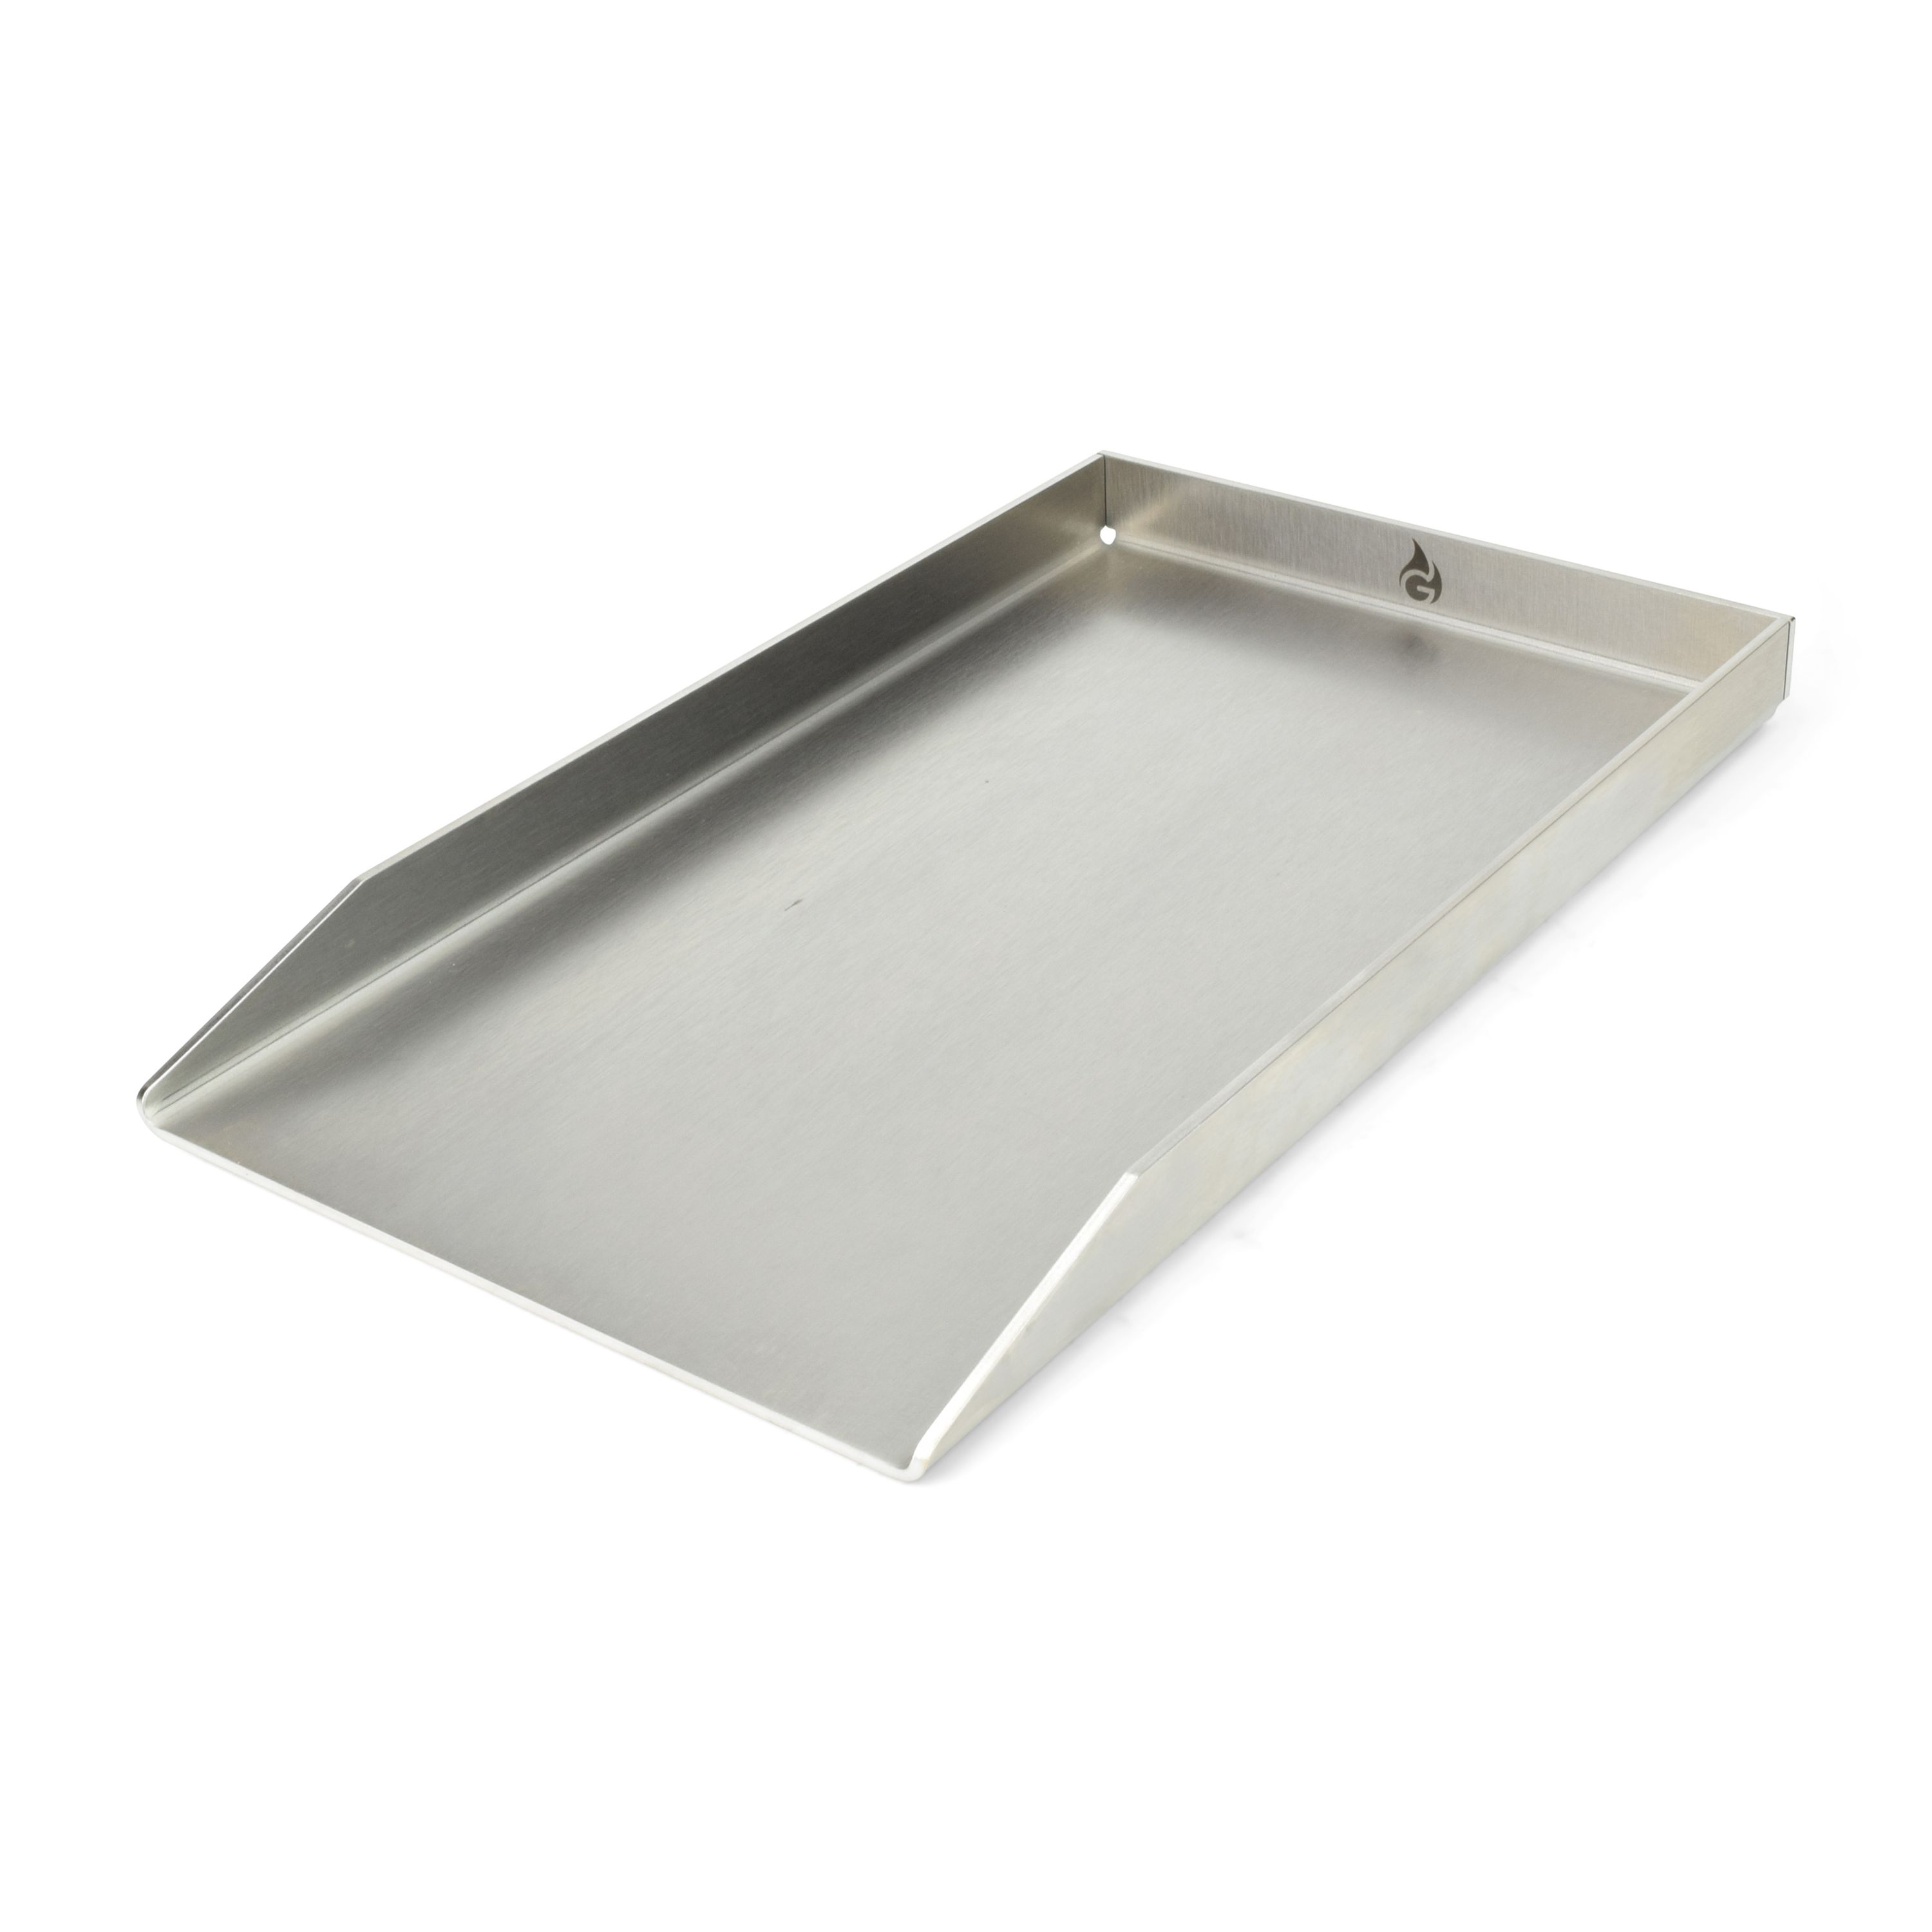 Stainless steel grill plate - Plancha 44,3x 26